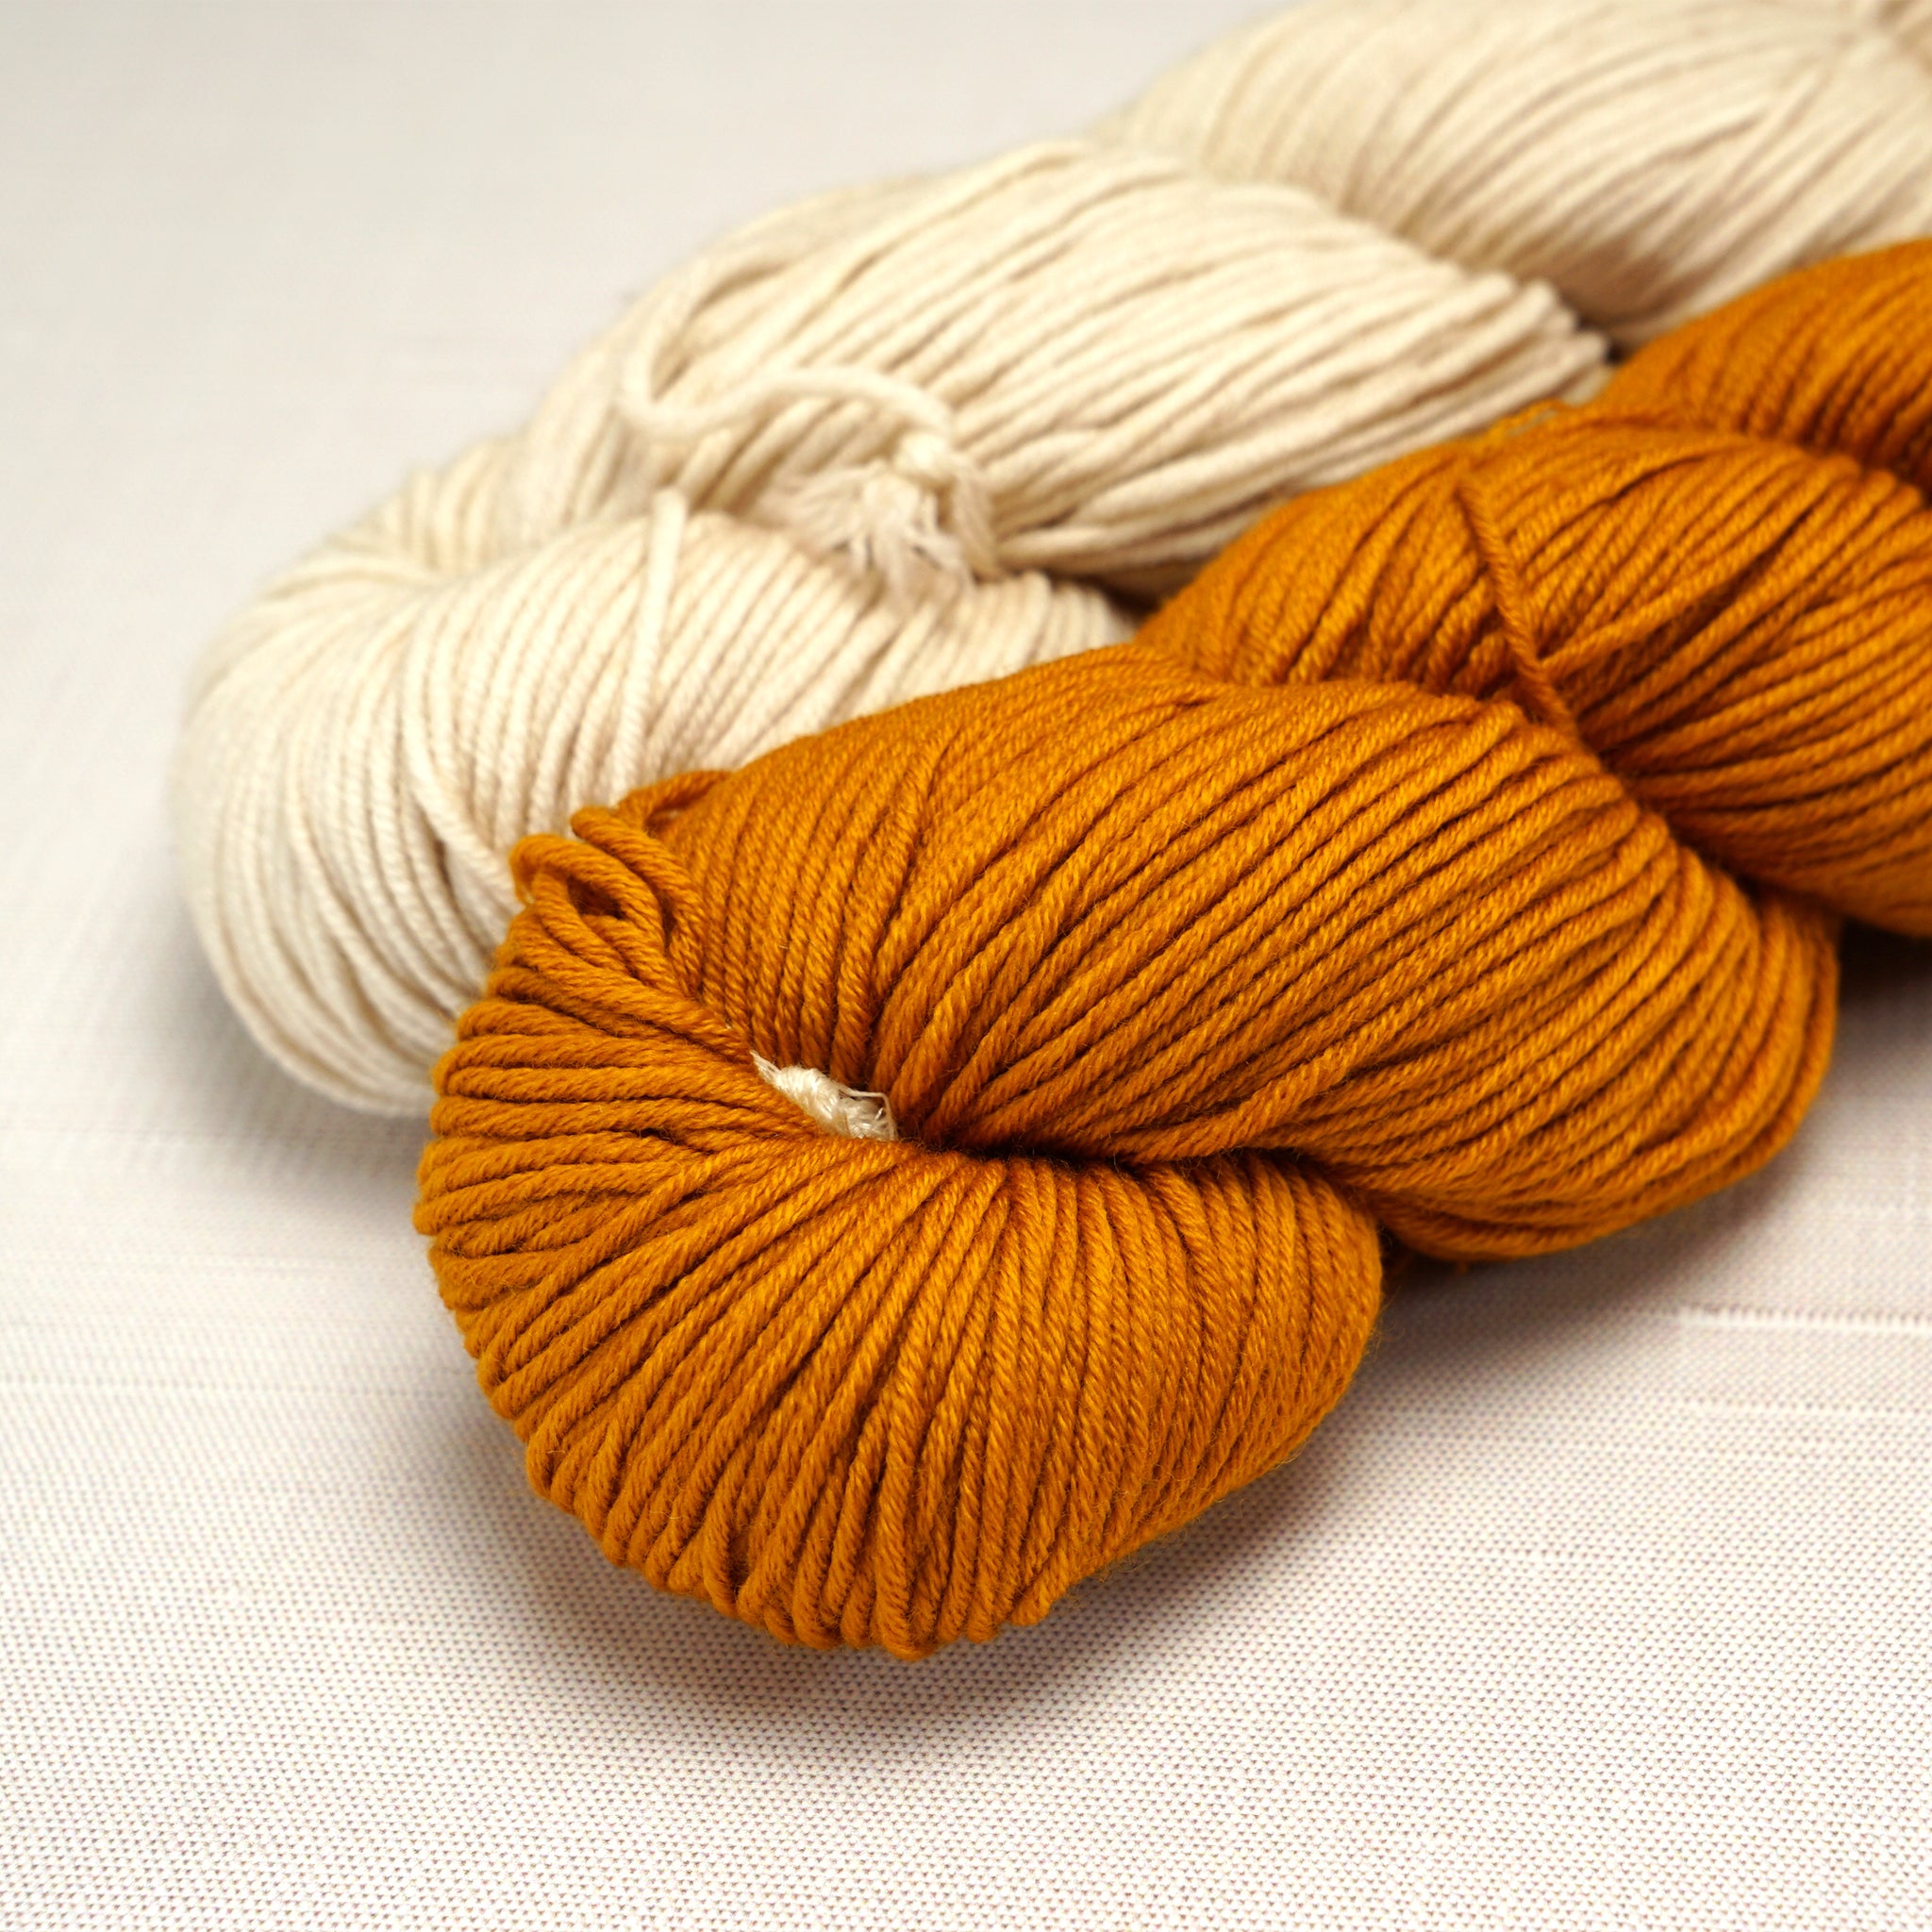 16 Worsted